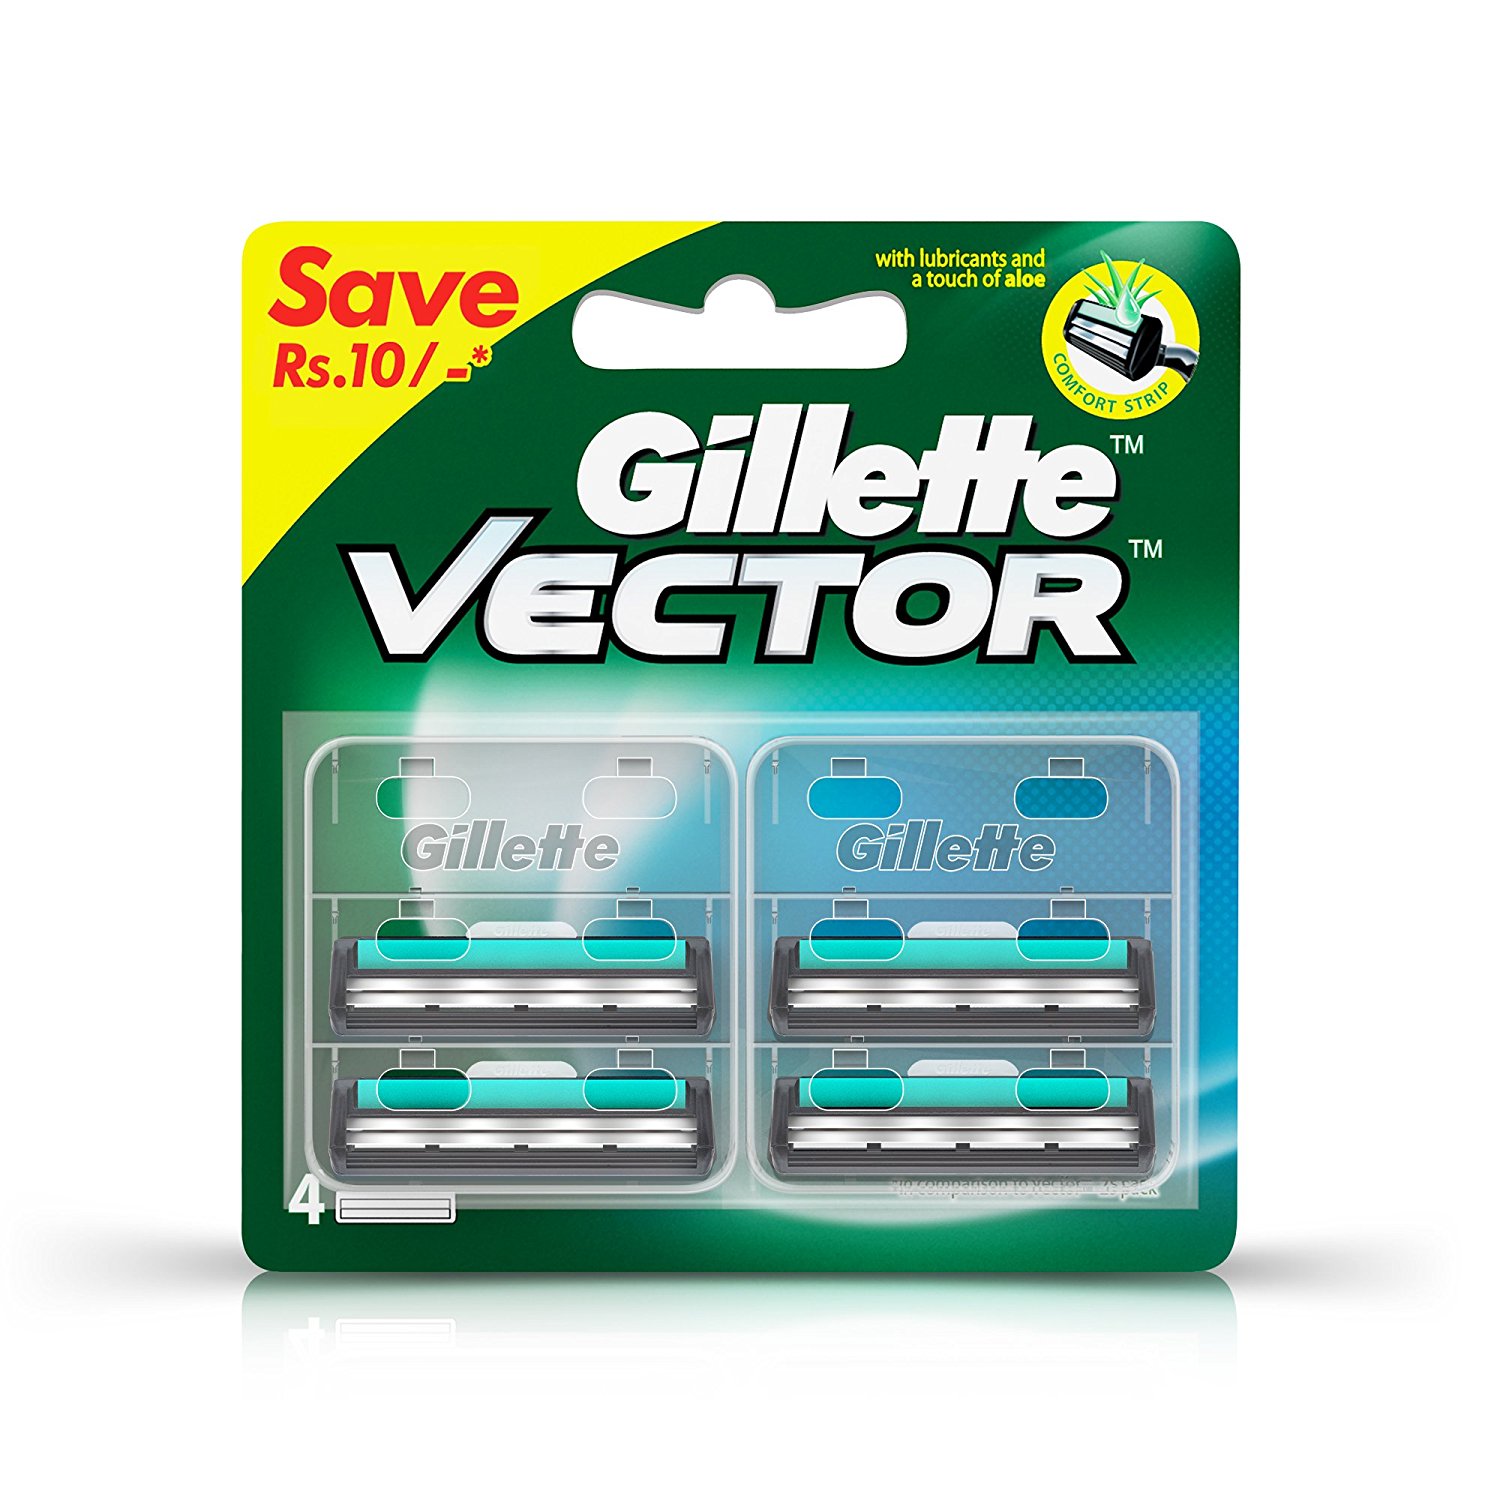 Amazon: Buy Gillette Vector Plus Manual Shaving Razor Blades (Cartridge) at Rs 40 only